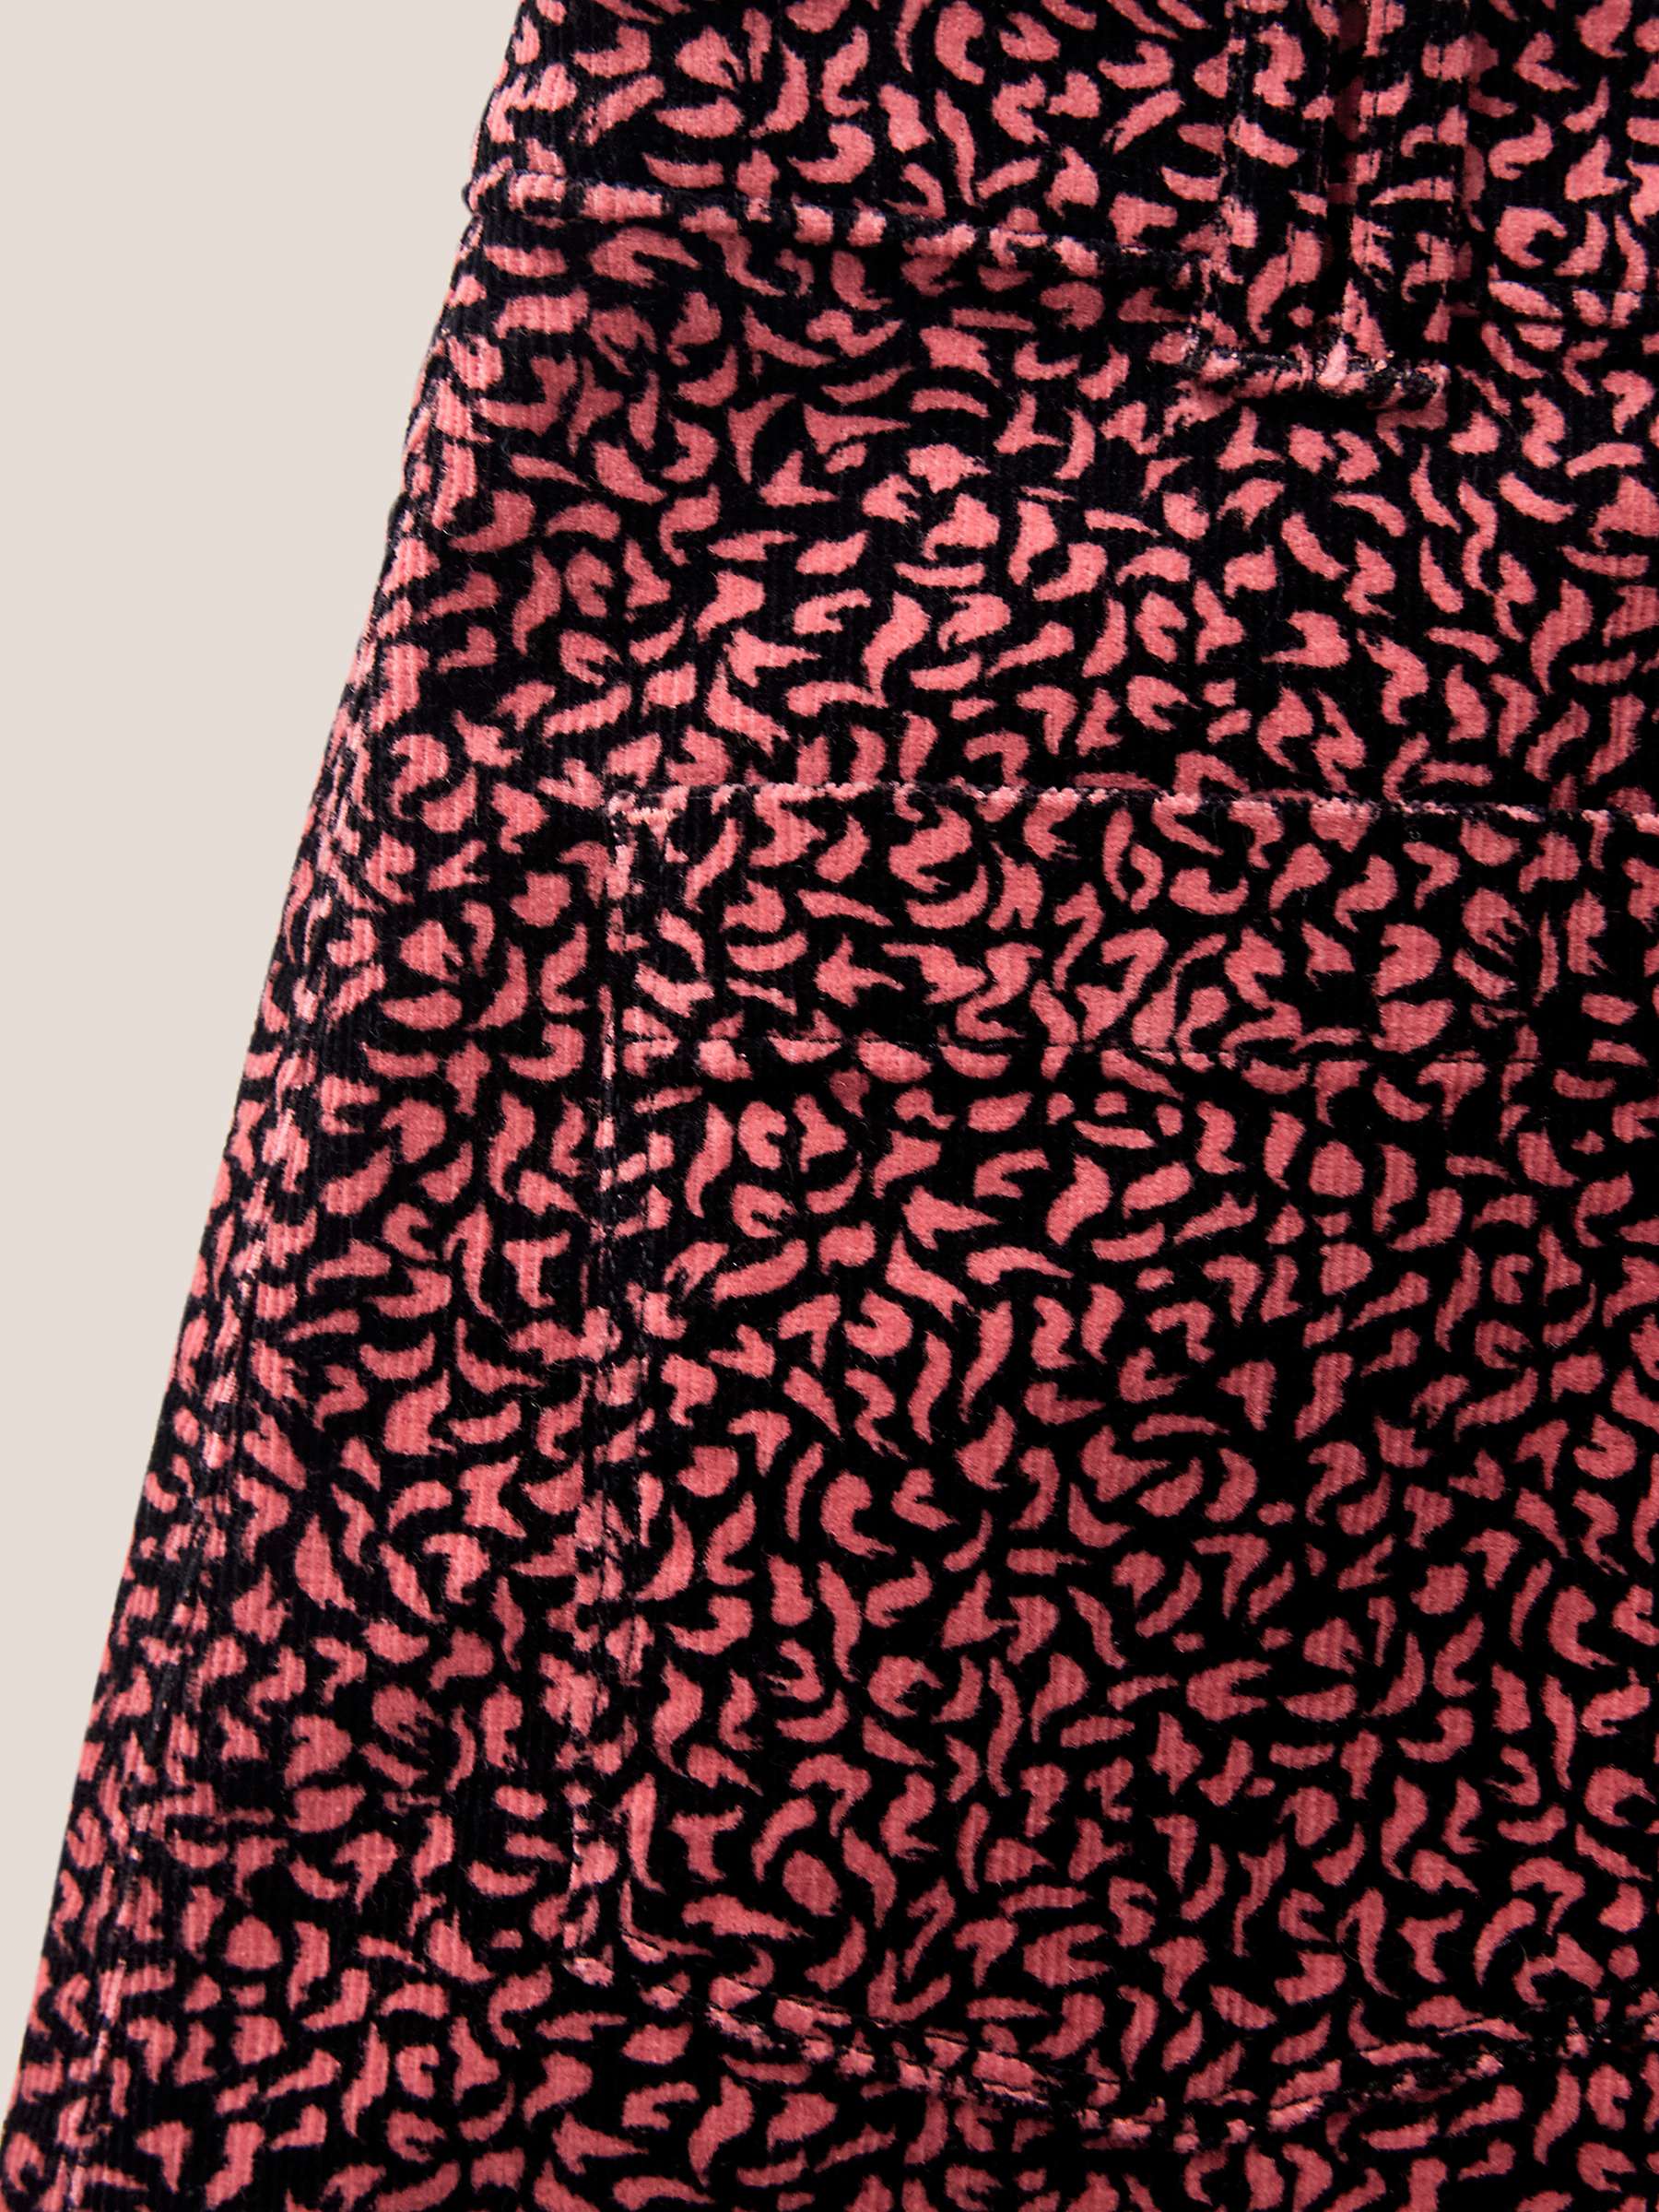 Buy White Stuff Abstract Print Organic Cotton Cord Skirt, Pink/Multi Online at johnlewis.com